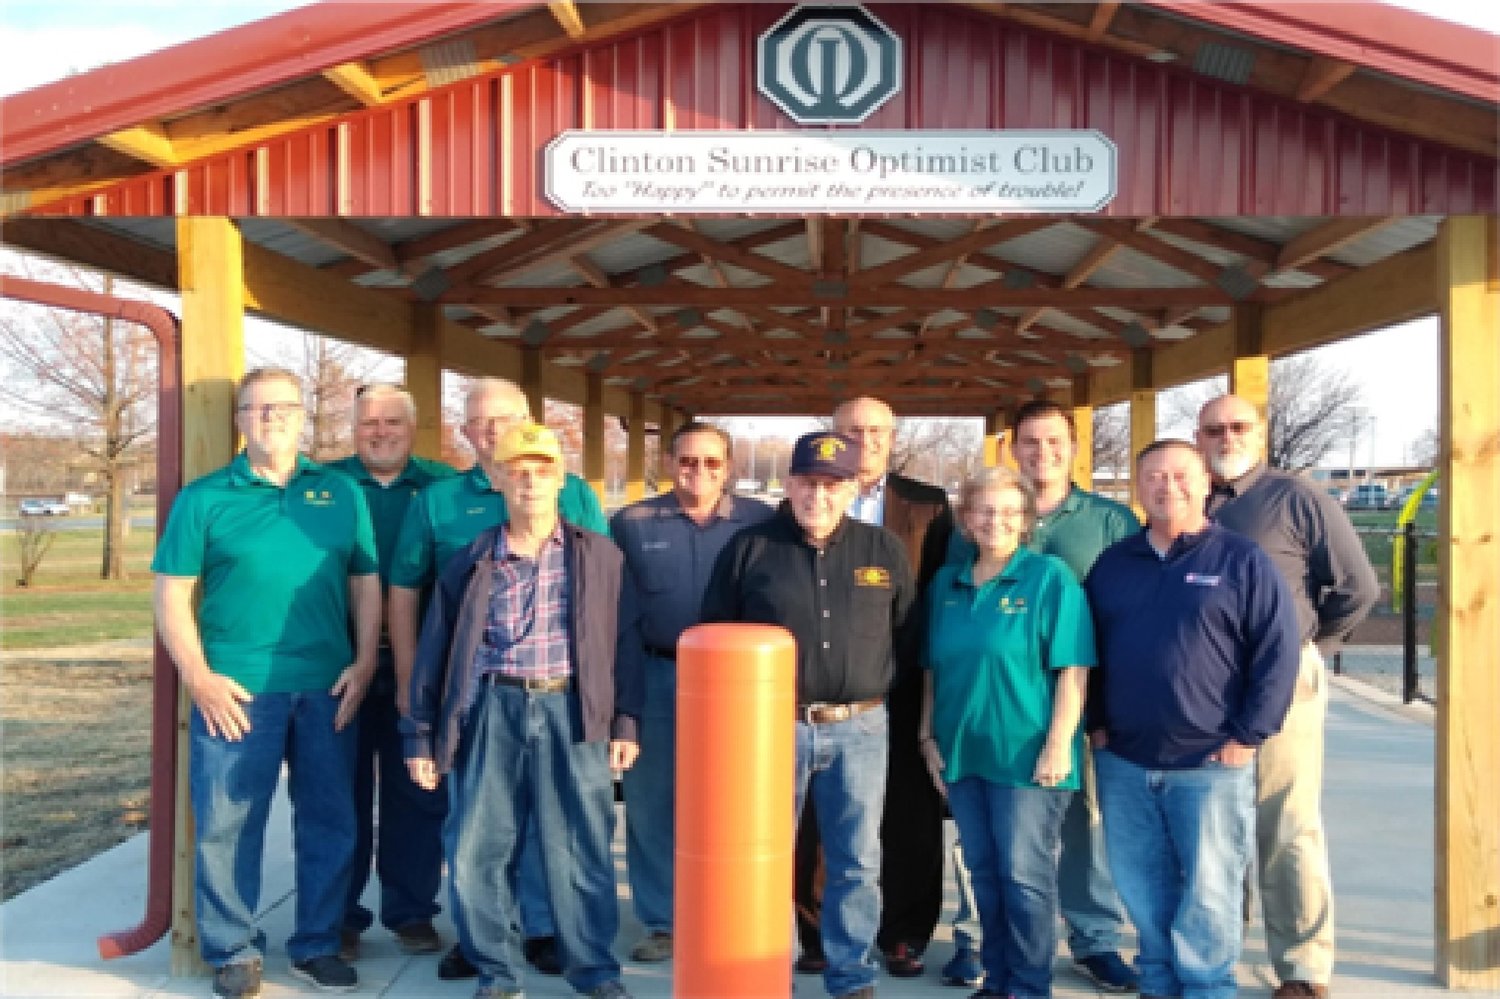 Clinton Sunrise Optimist Club recently celebrated the completion of the shelter house they donated to Clinton Park and Recreation Department. Park and Rec. Director, Brad Combs joined club members for photos. (Front)Tim Powell, Wilbur Caldwell, Sandi Cox, Brad Combs, (back) Don Eaton, Don Varner, Gene Henry, Jim Cook, Steve Bradley, Tom Gregg and Derald Lammers at the Shelter house.